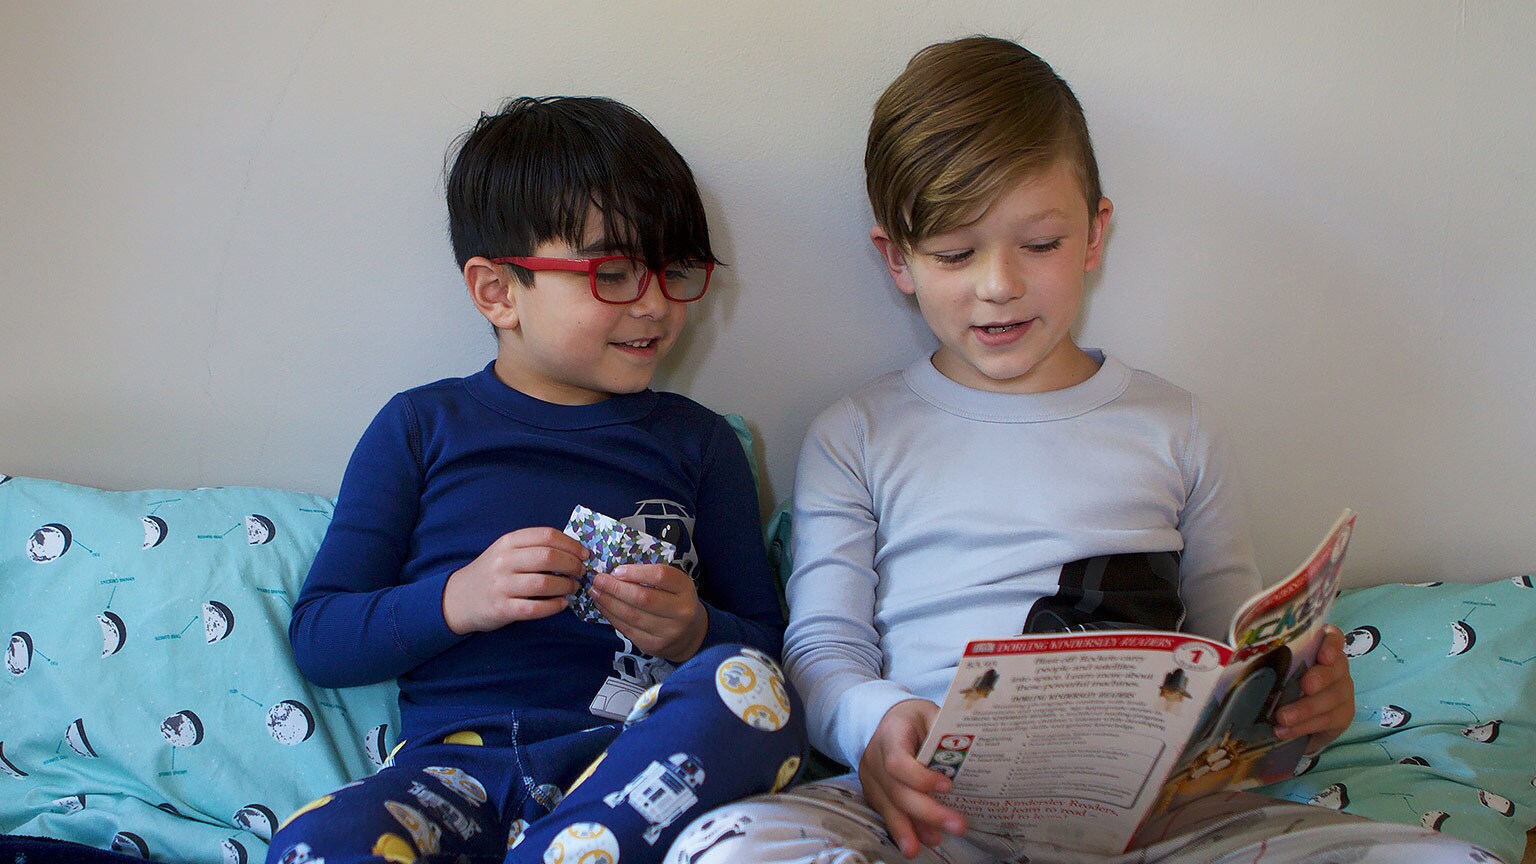 Cozy Up with the Star Wars Block Book and Matching PJs